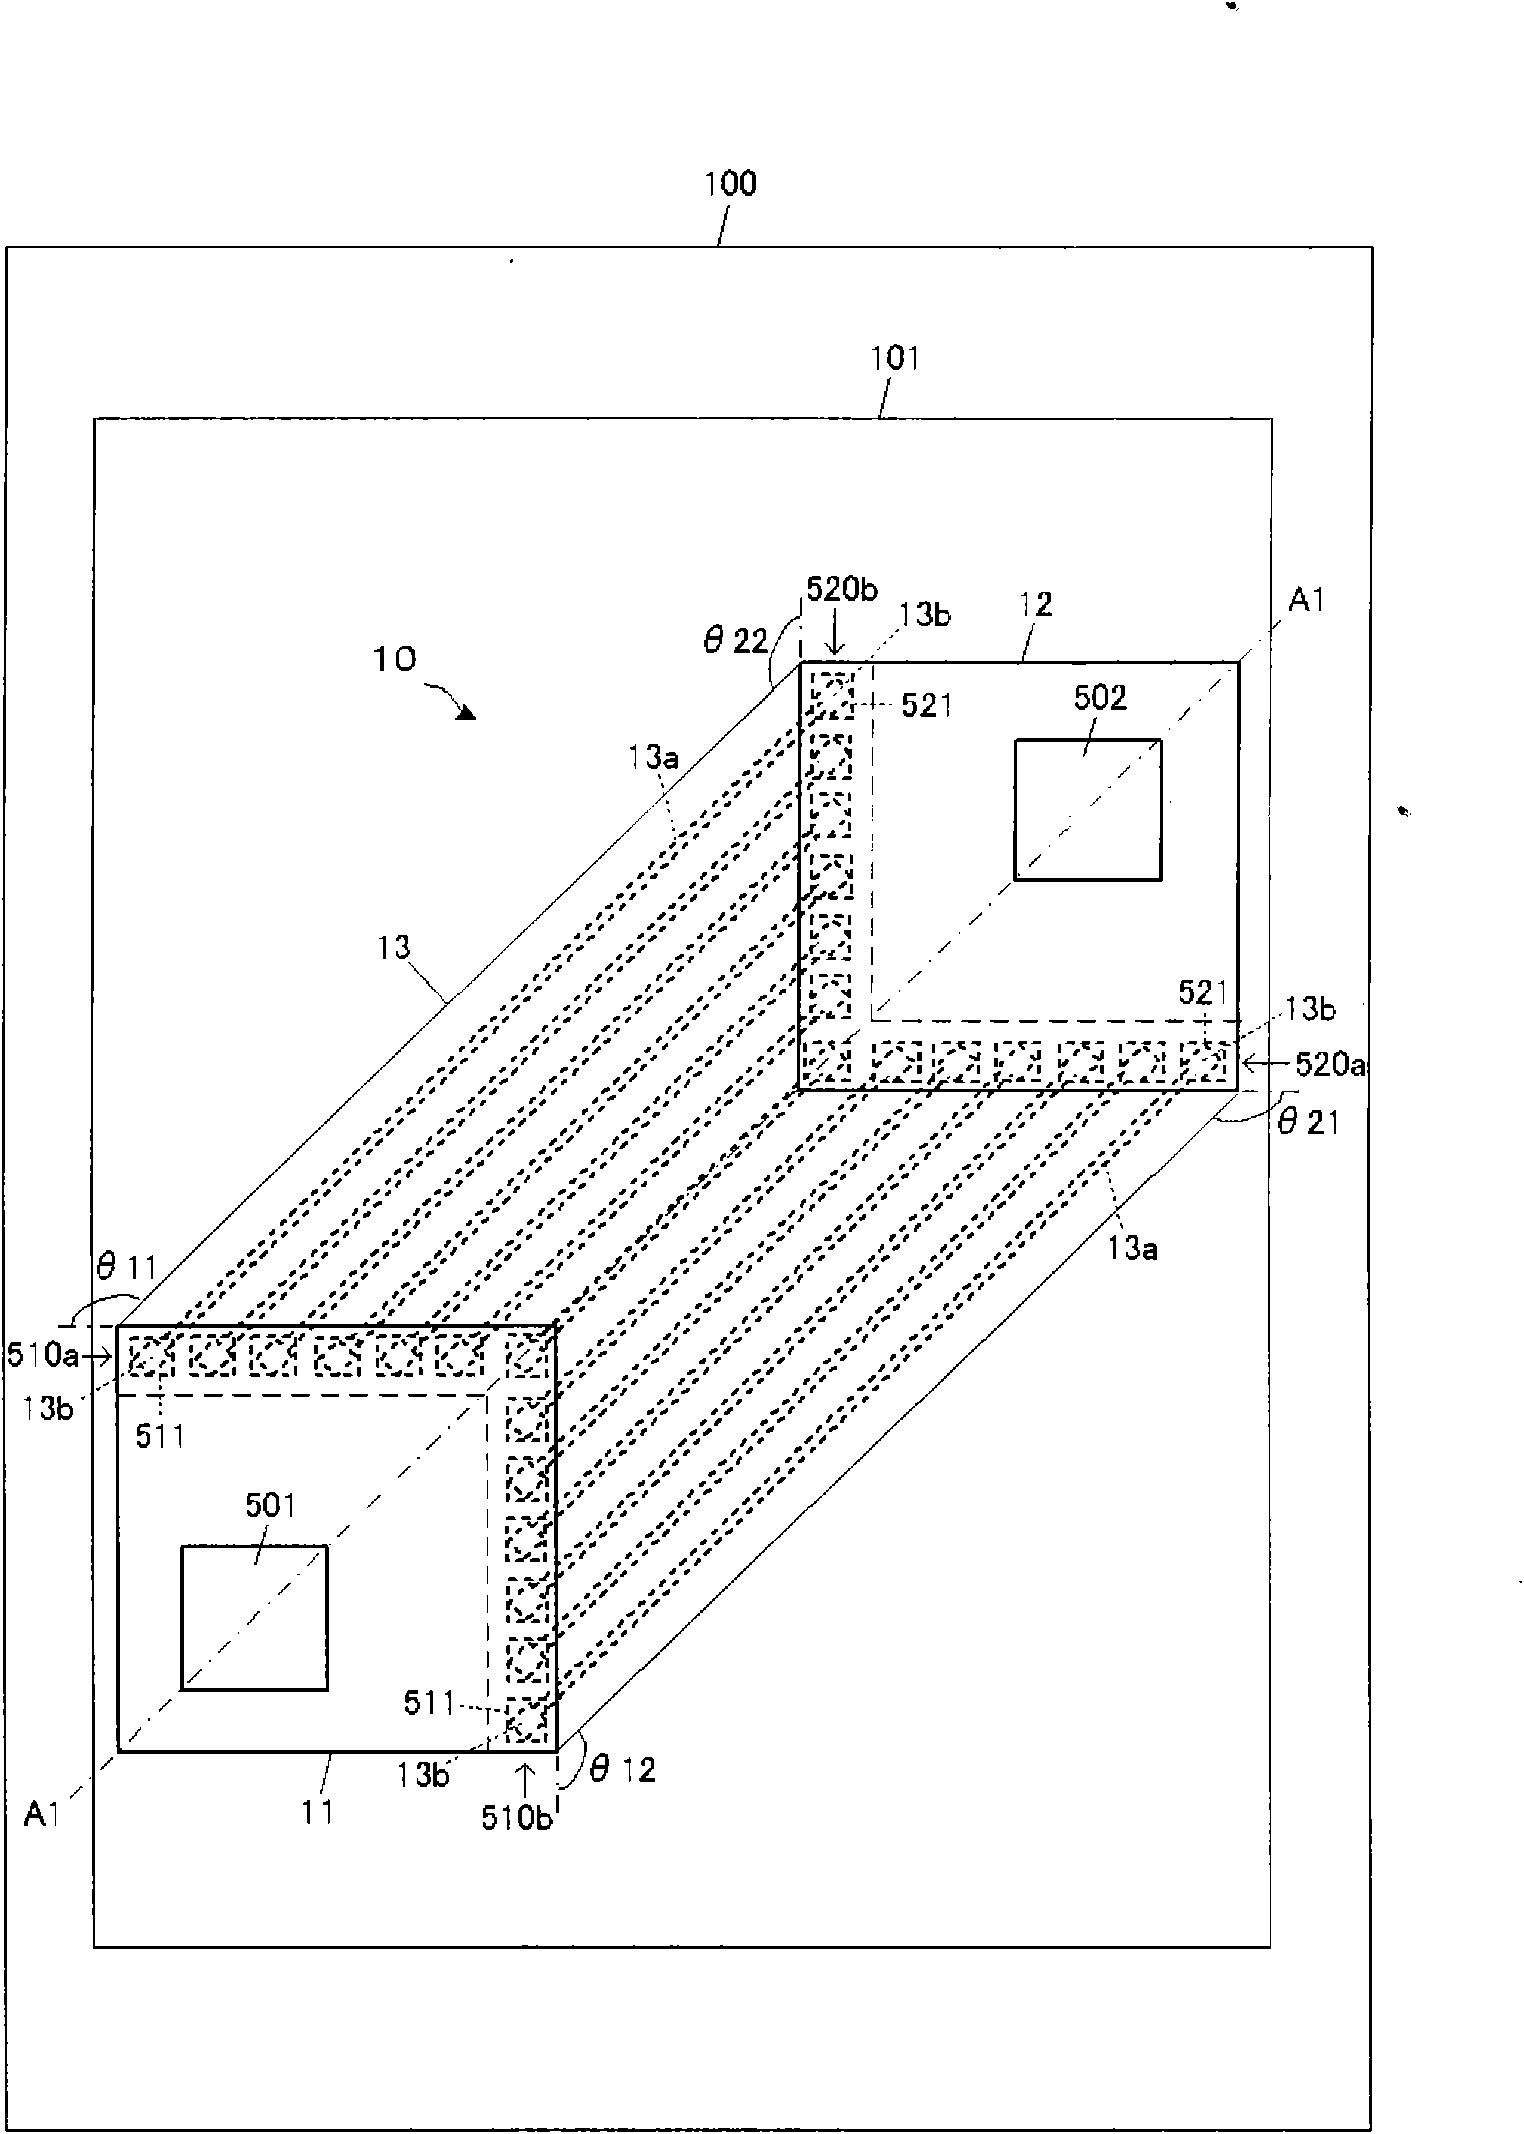 Flex-rigid wiring board and electronic device